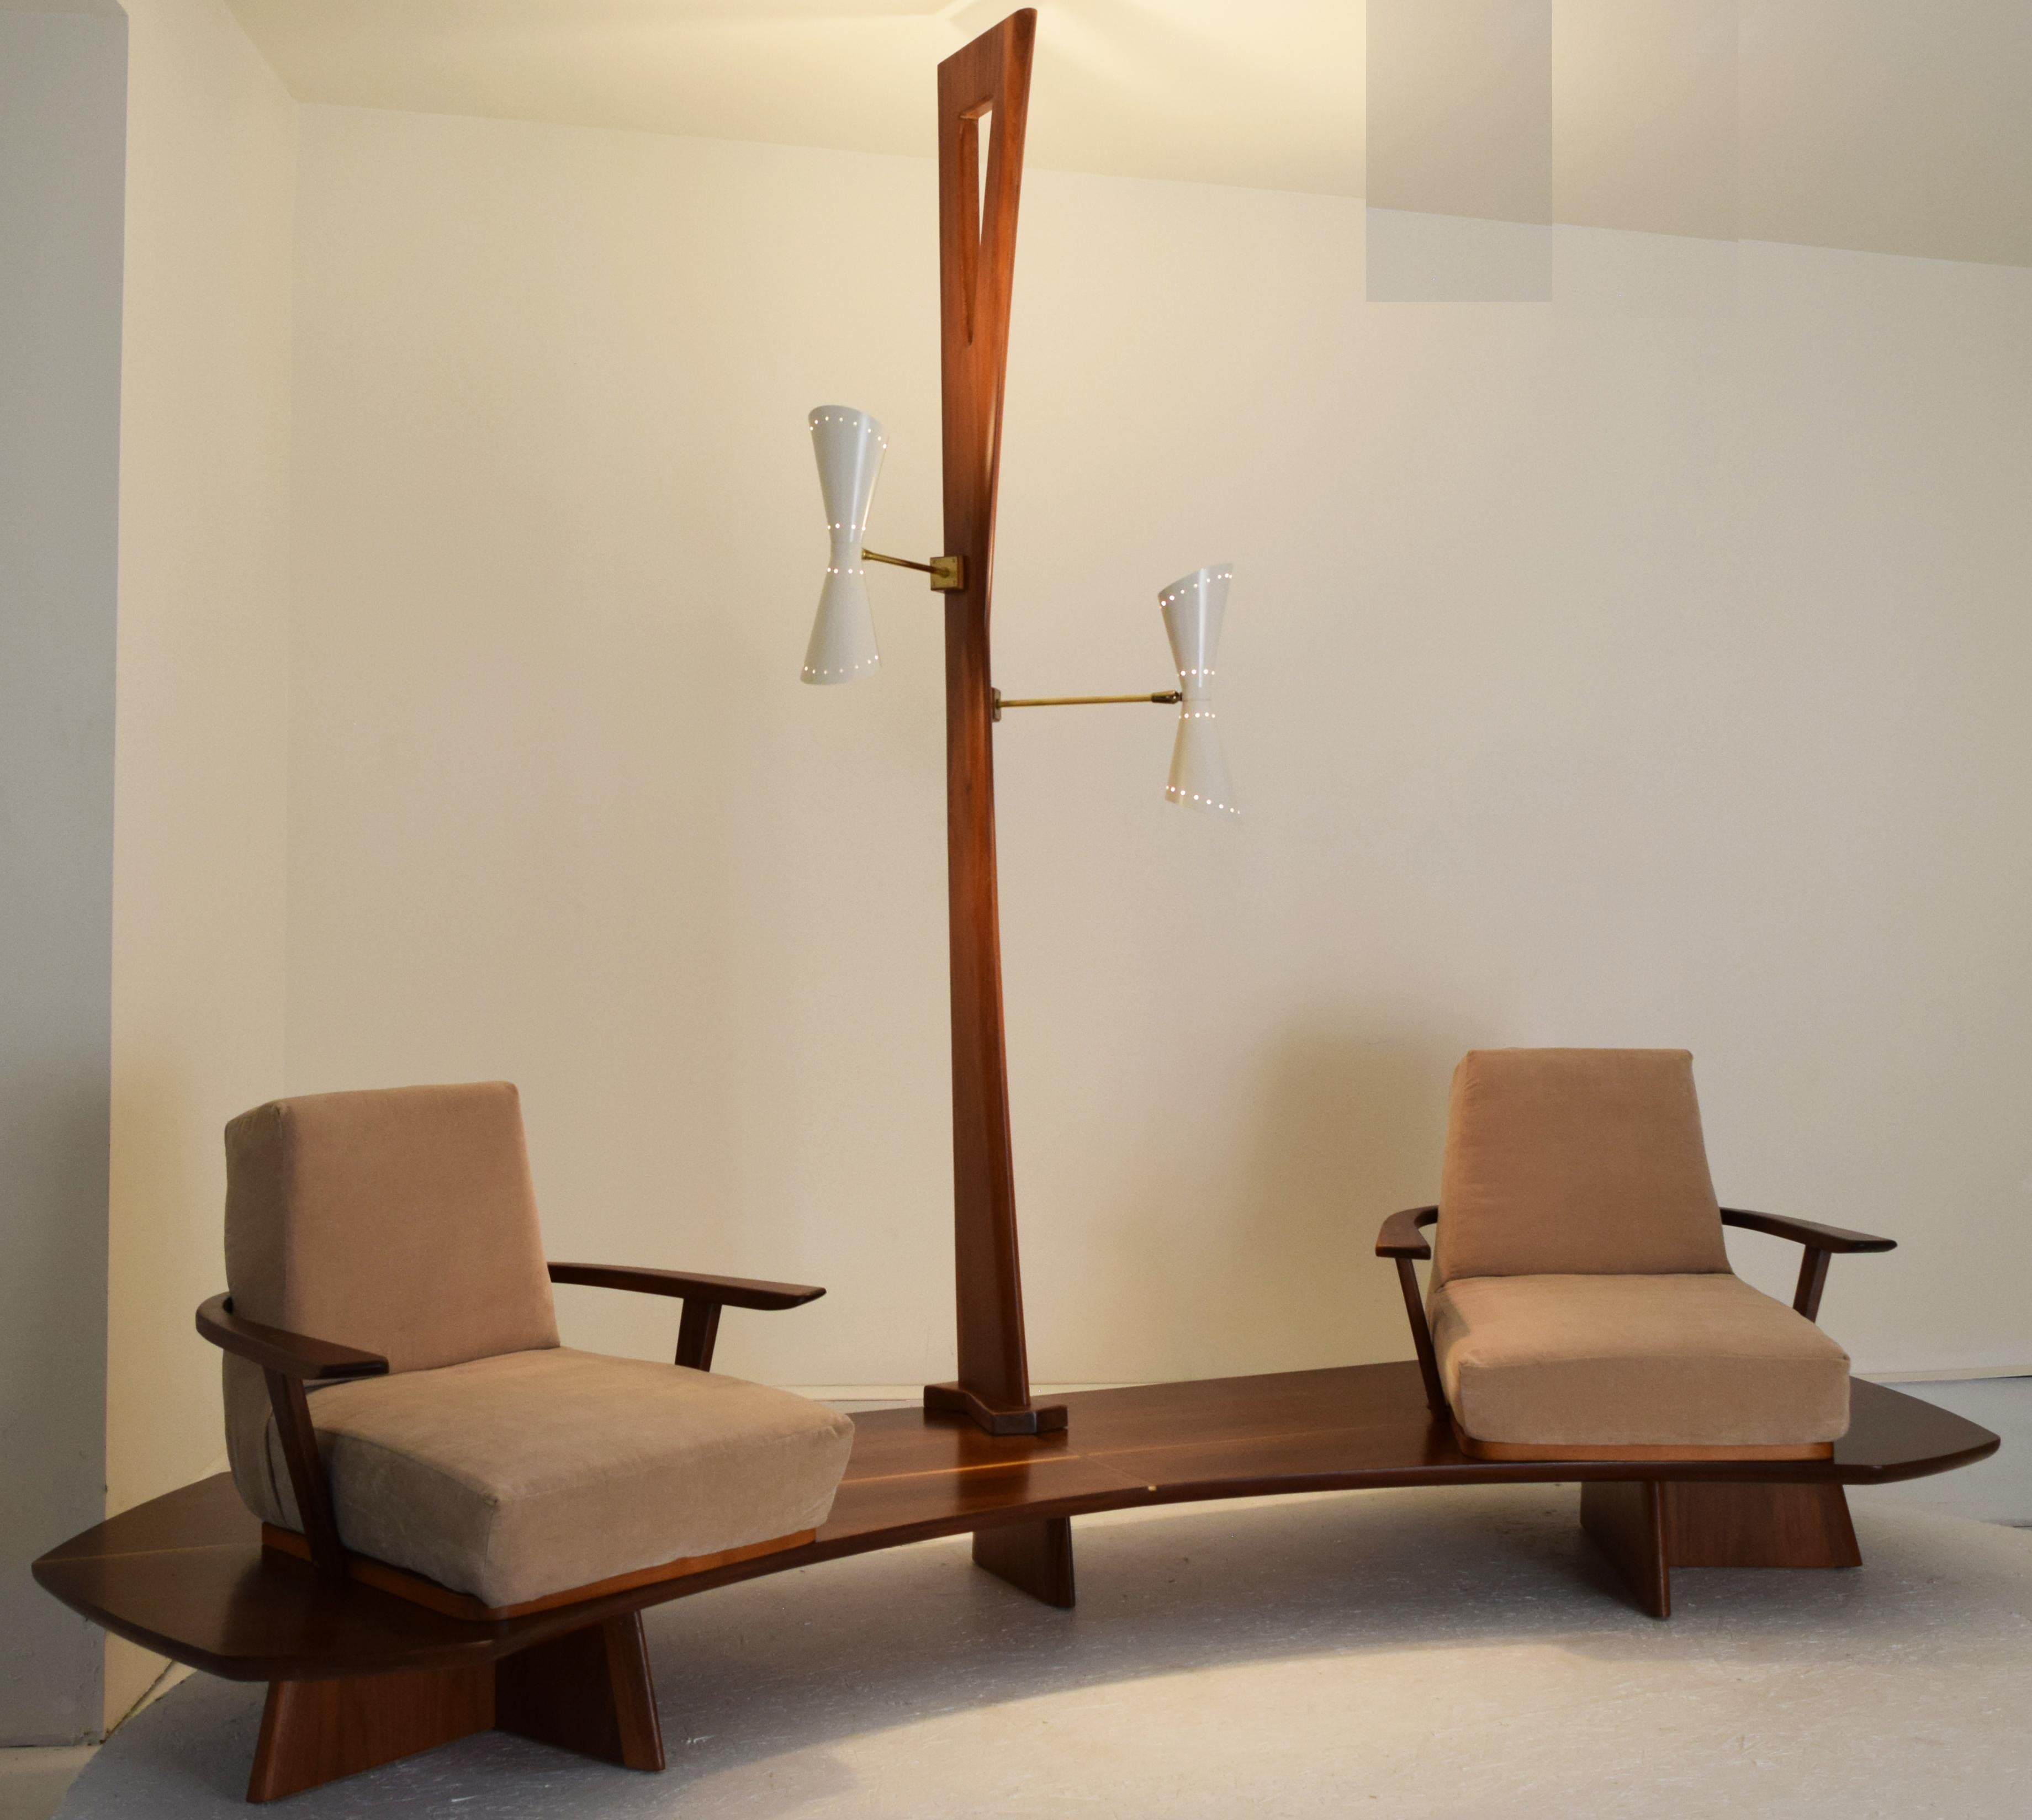 Samson Berman studio, NY, USA, circa 1955. Integrated illuminated tandem chair platform, walnut, brass, lighting. 
121.5 wide x 41.5 deep and changeable height of 101 inches tall. Lamp can be abbreviated prior to shipment for lower ceiling